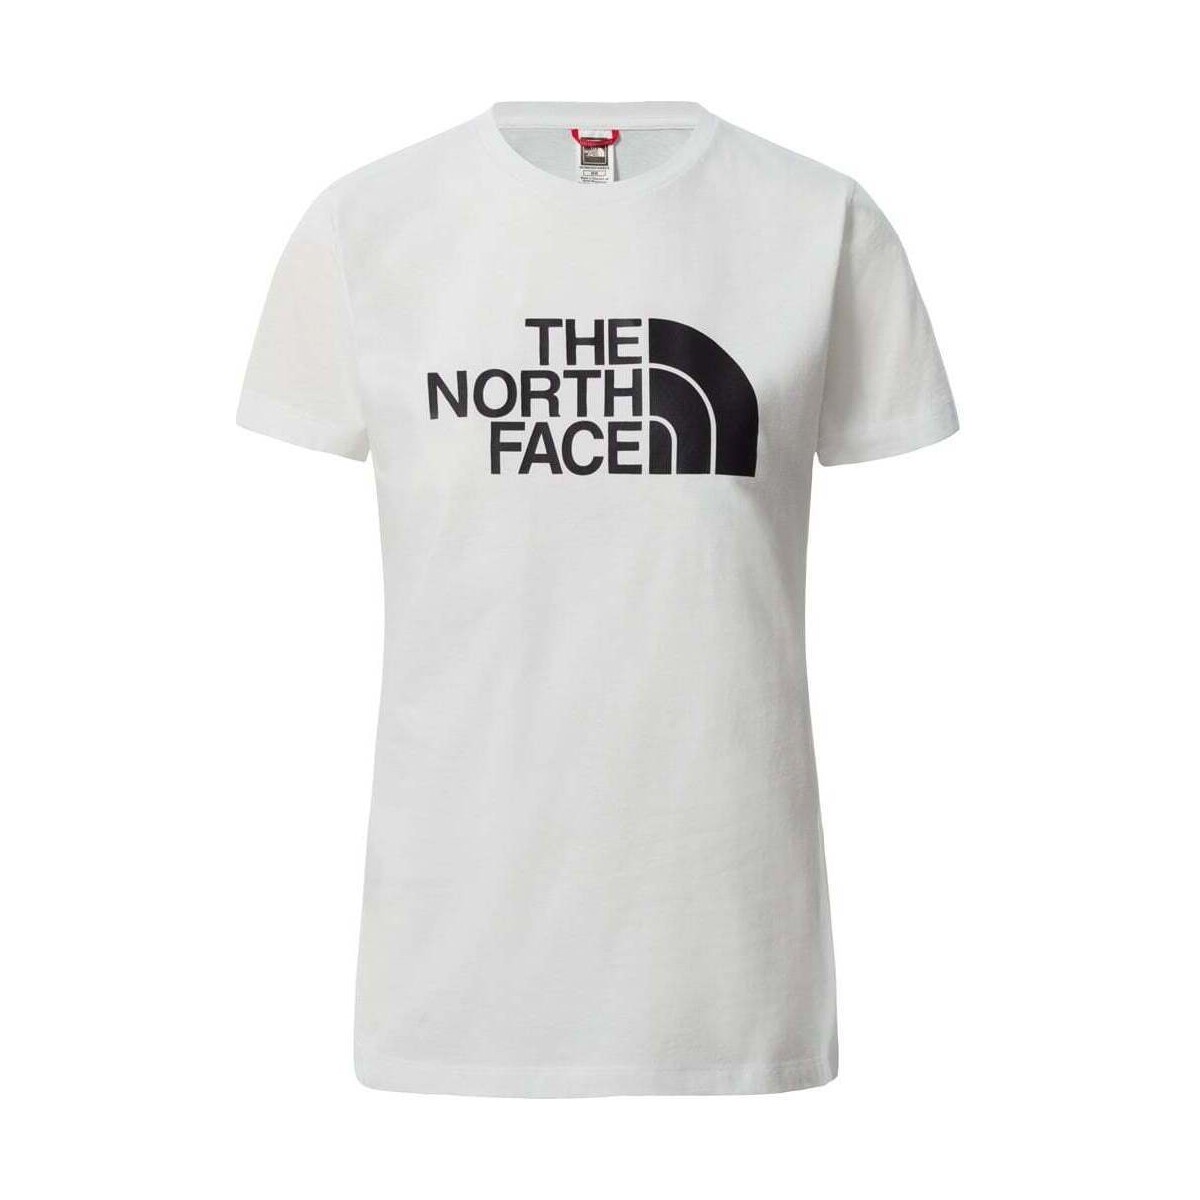 Vêtements Femme Chemises / Chemisiers The North Face W S/S EASY TEE Blanc